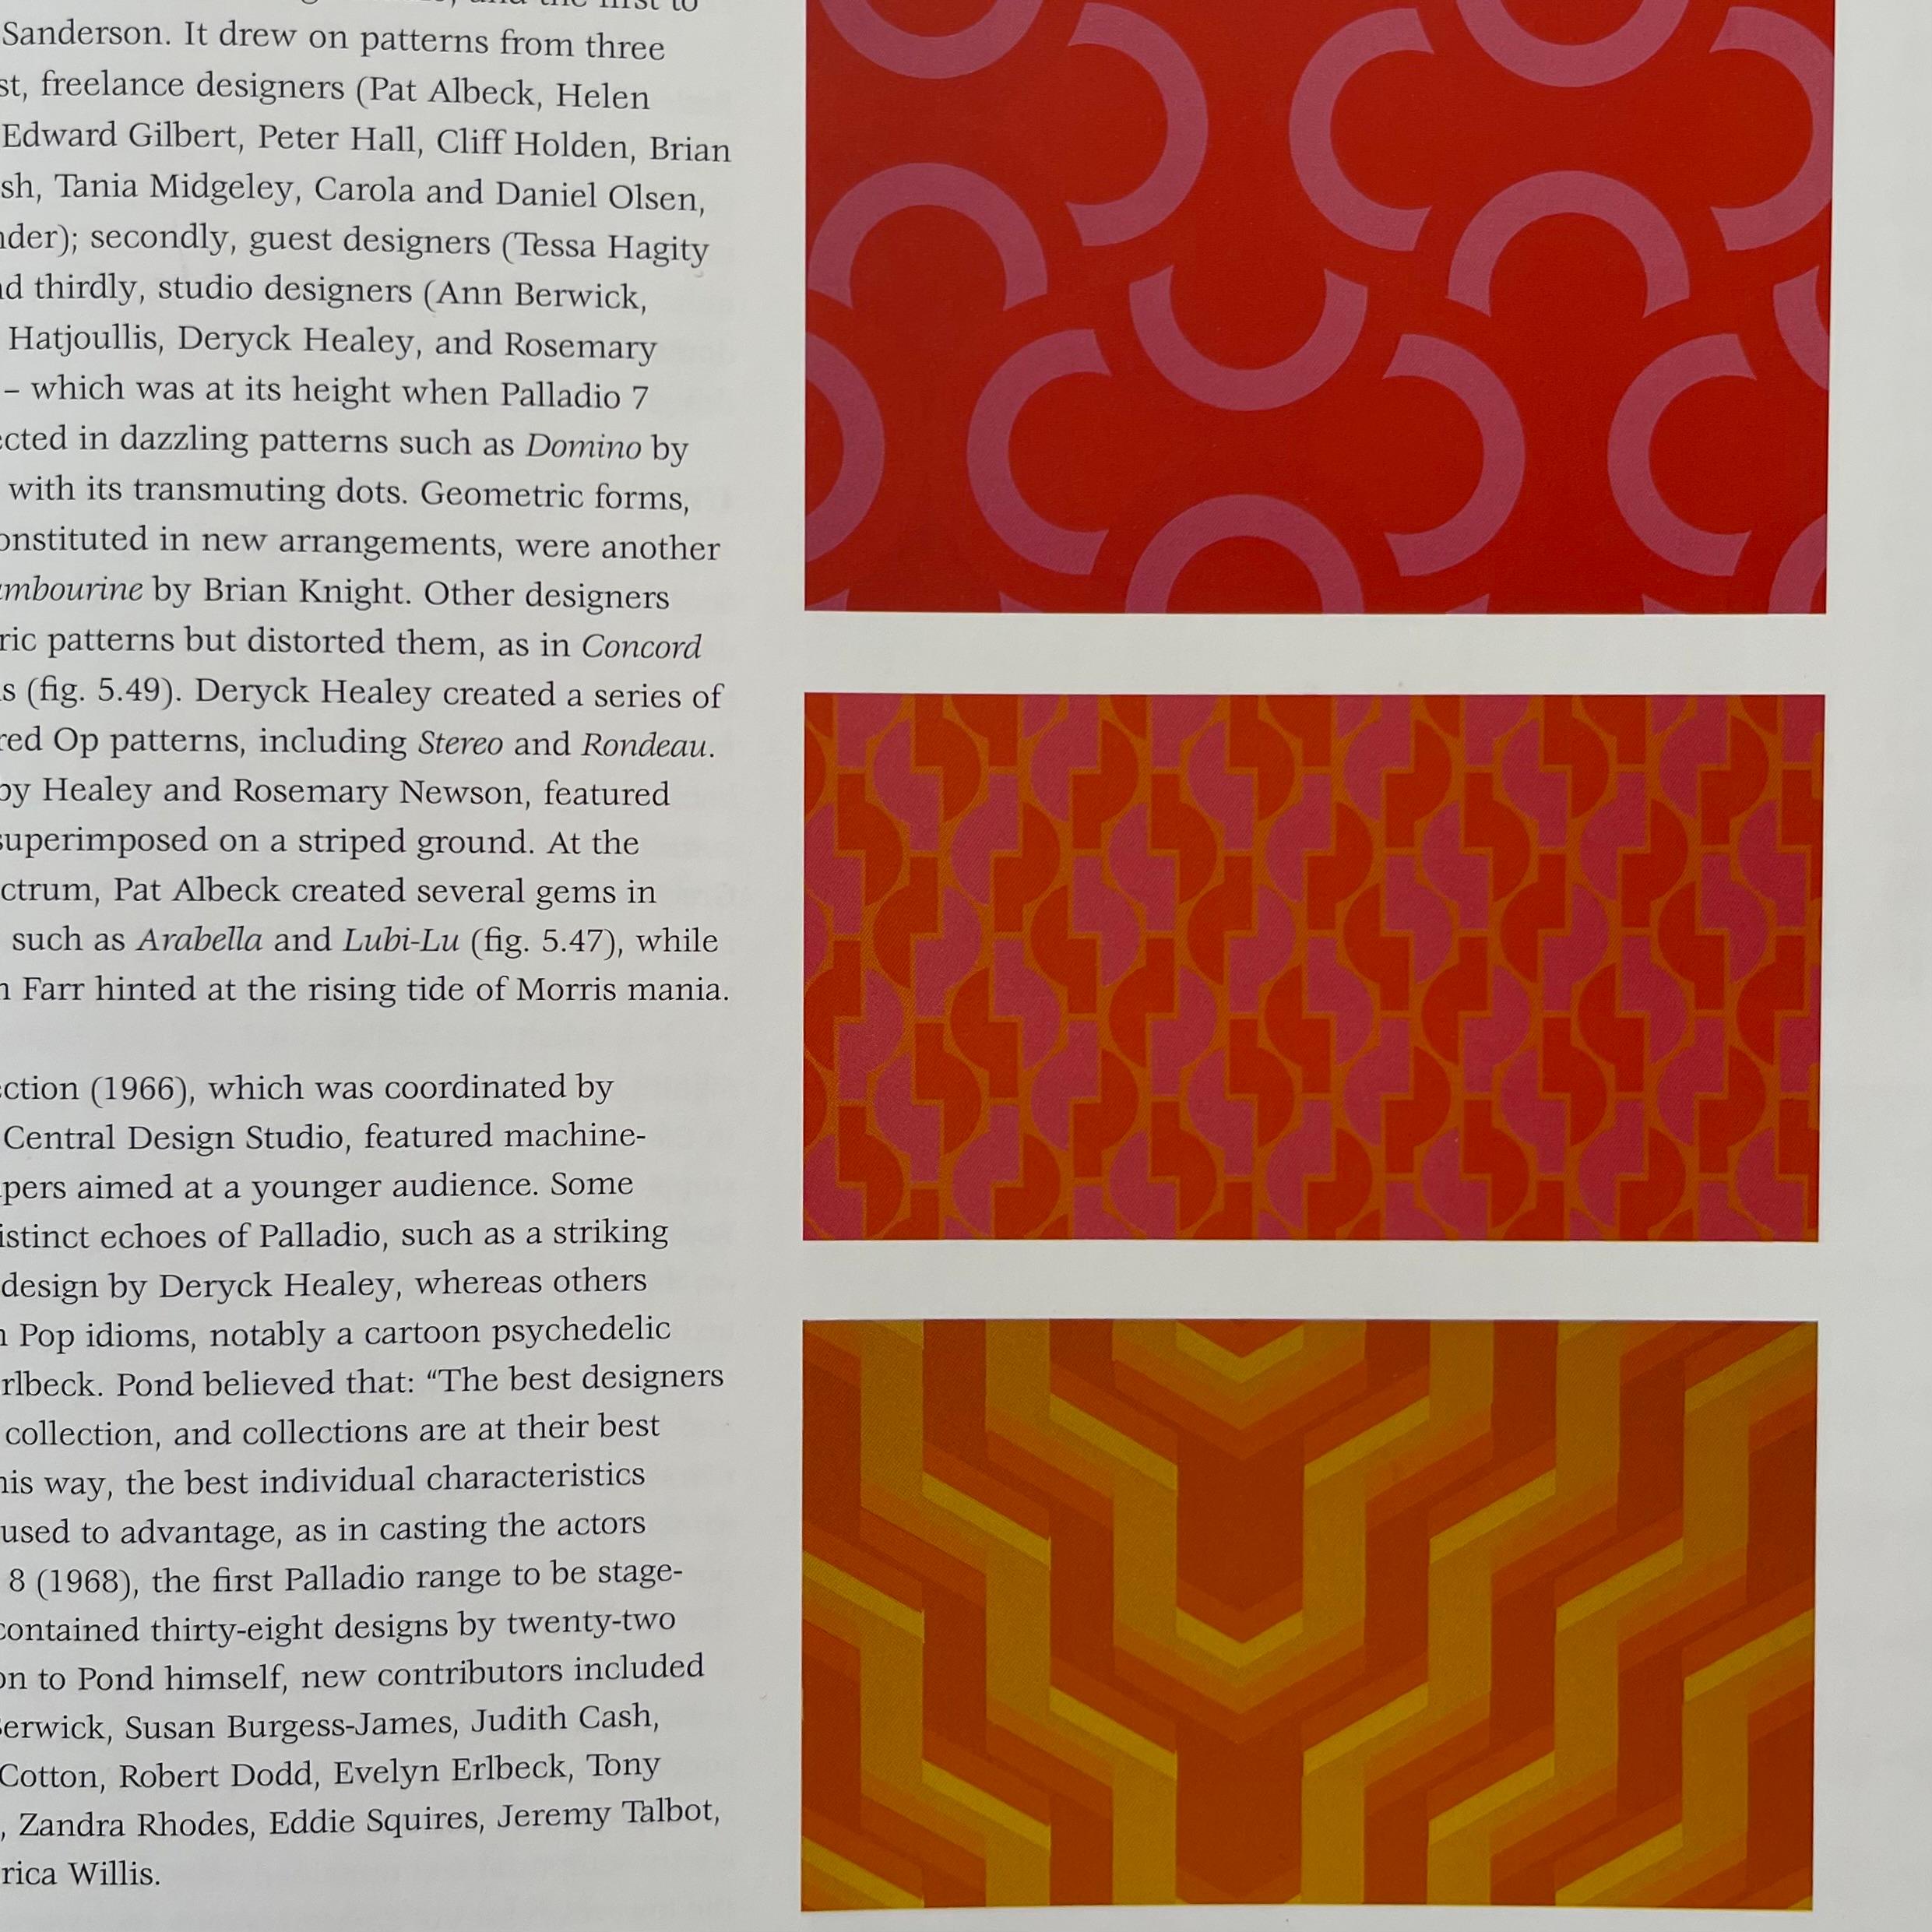 Published by Mitchell Beazley 2002 hardcover

This invaluable book provides a chronological account of the development of pattern design. Highlighting the decisive trends that emerged in each decade, the book draws attention to the achievements of